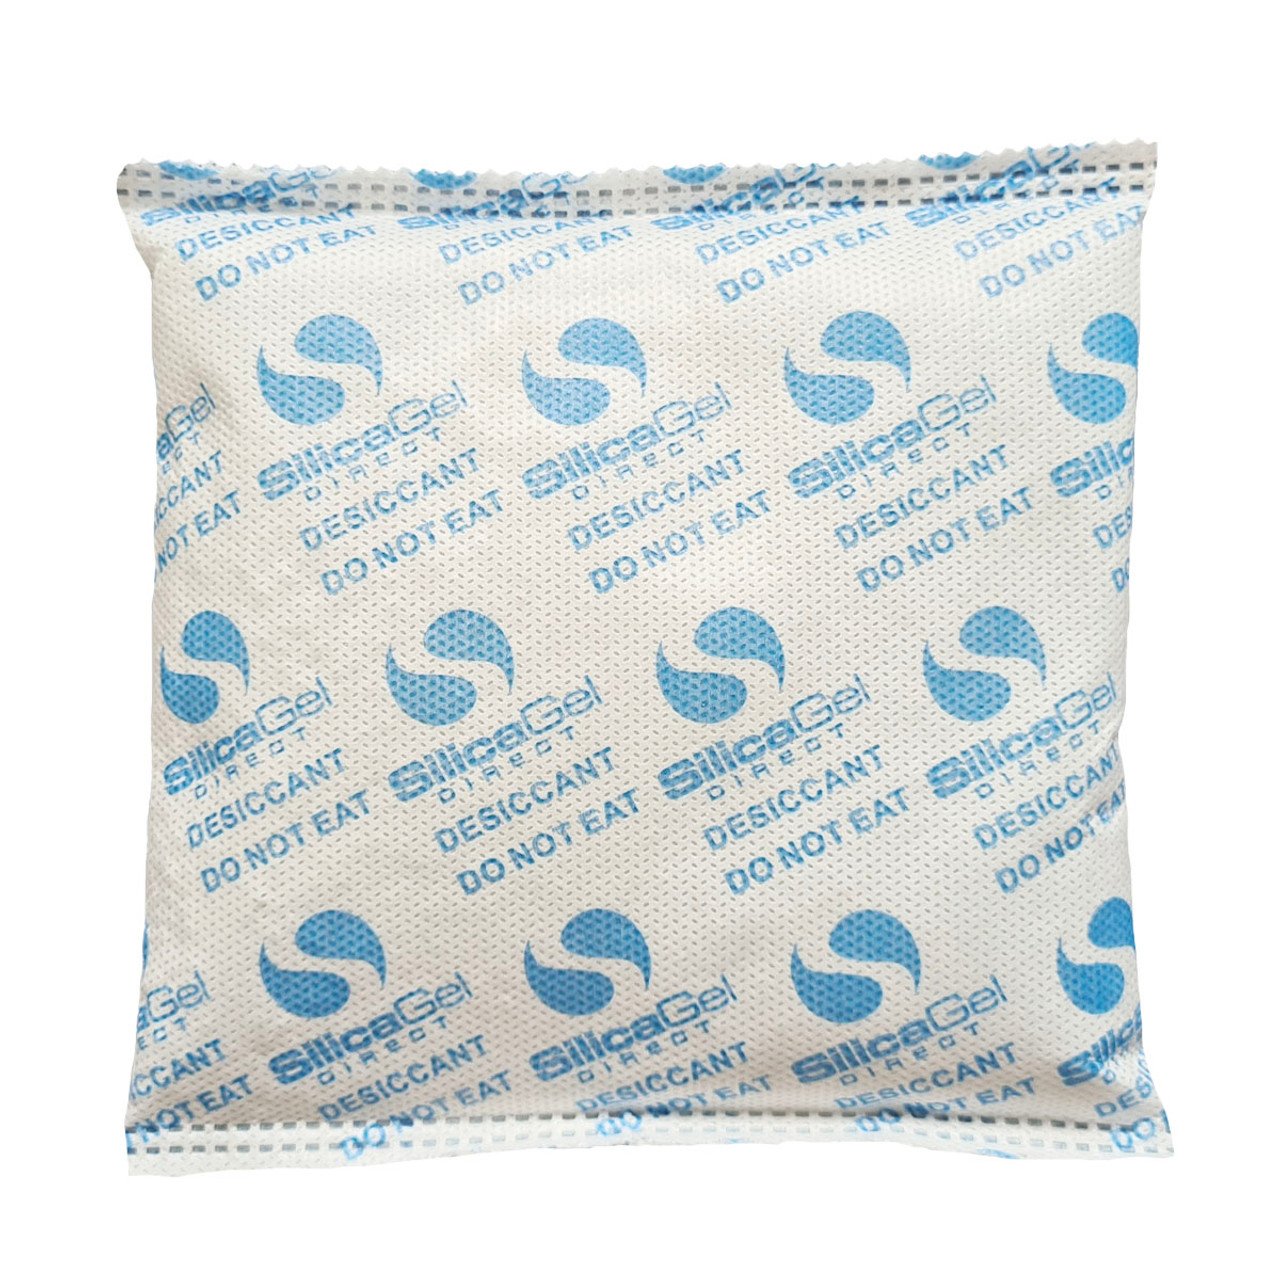 250gm Silica Gel Moisture Absorber Desiccant Packets (Non-Woven)